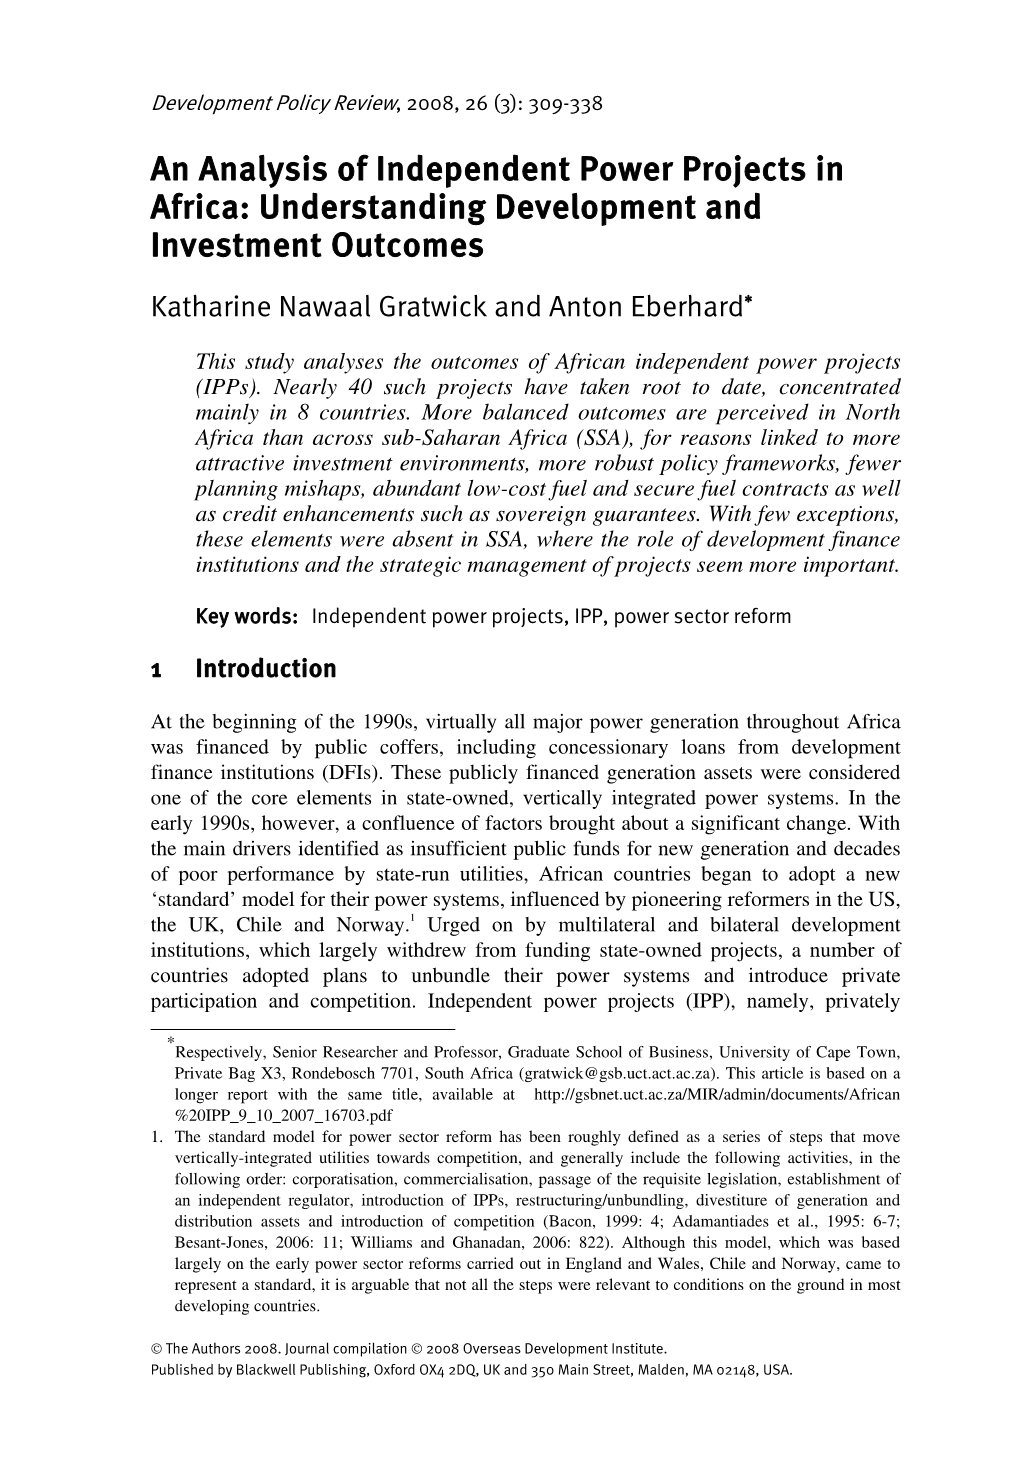 An Analysis of Independent Power Projects in Africa: Understanding Development and Investment Outcomes